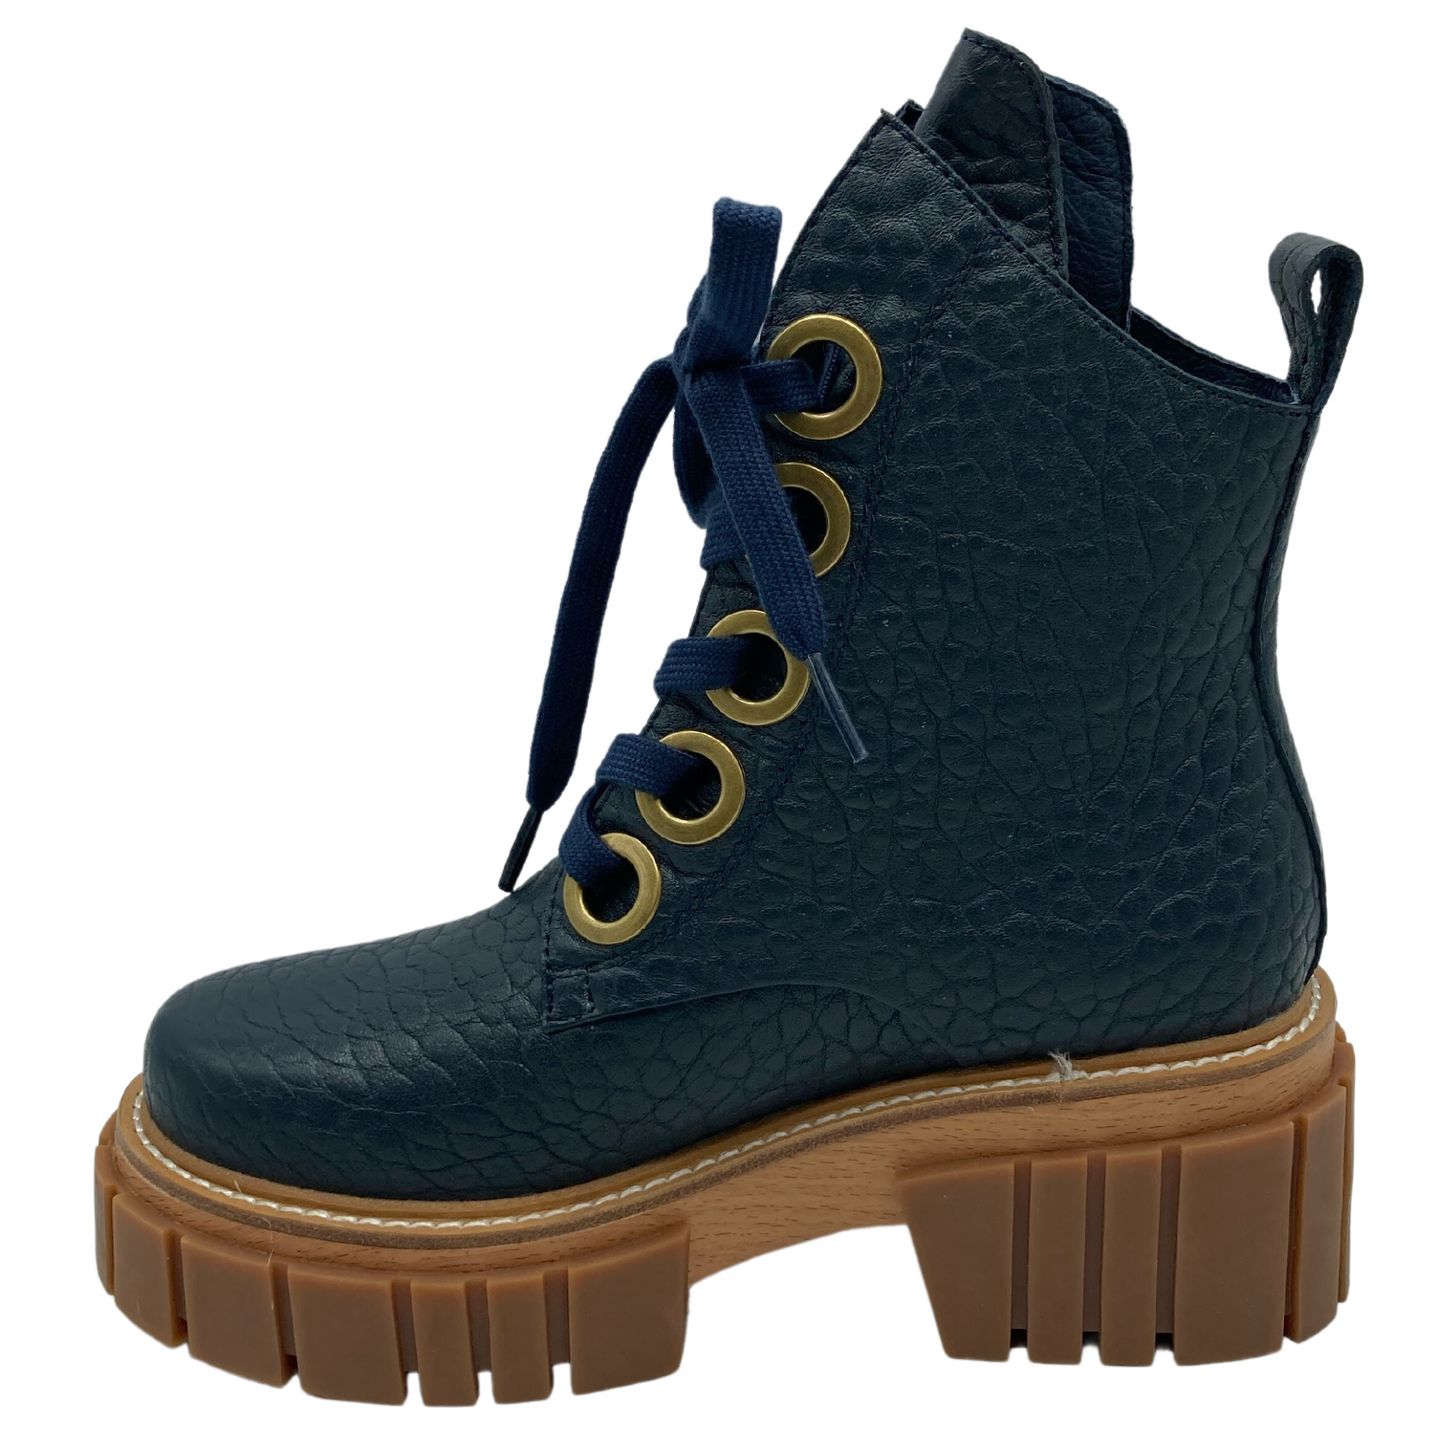 Left facing view of navy textured leather boot with gold eyelets for navy laces and chunky brown rubber outsole